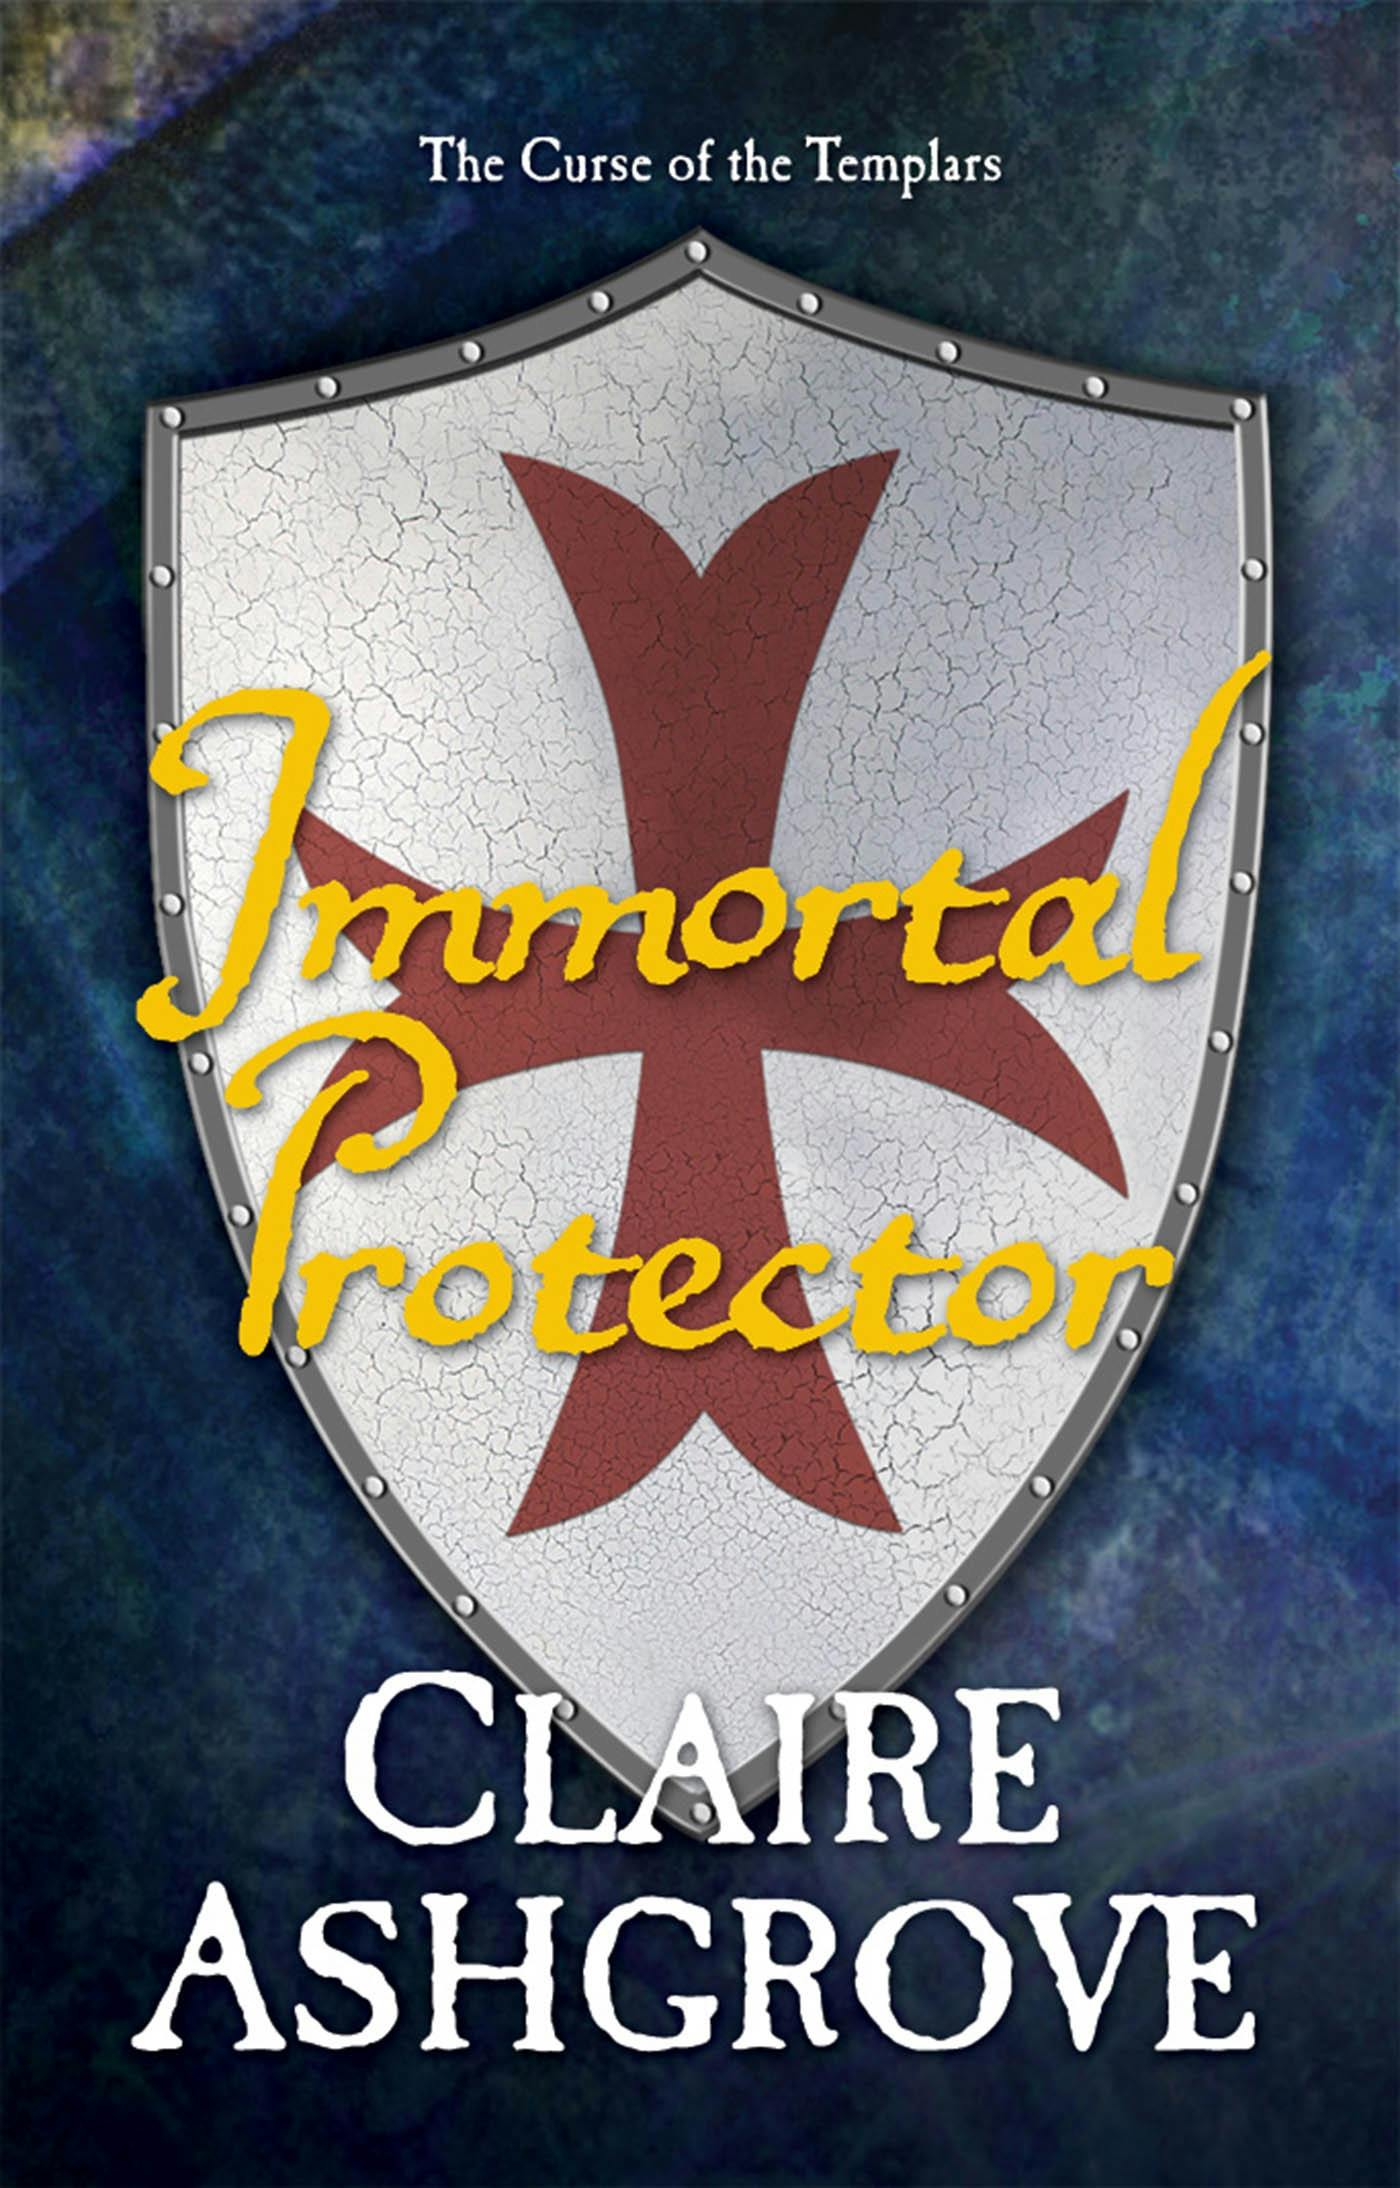 Cover for the book titled as: Immortal Protector